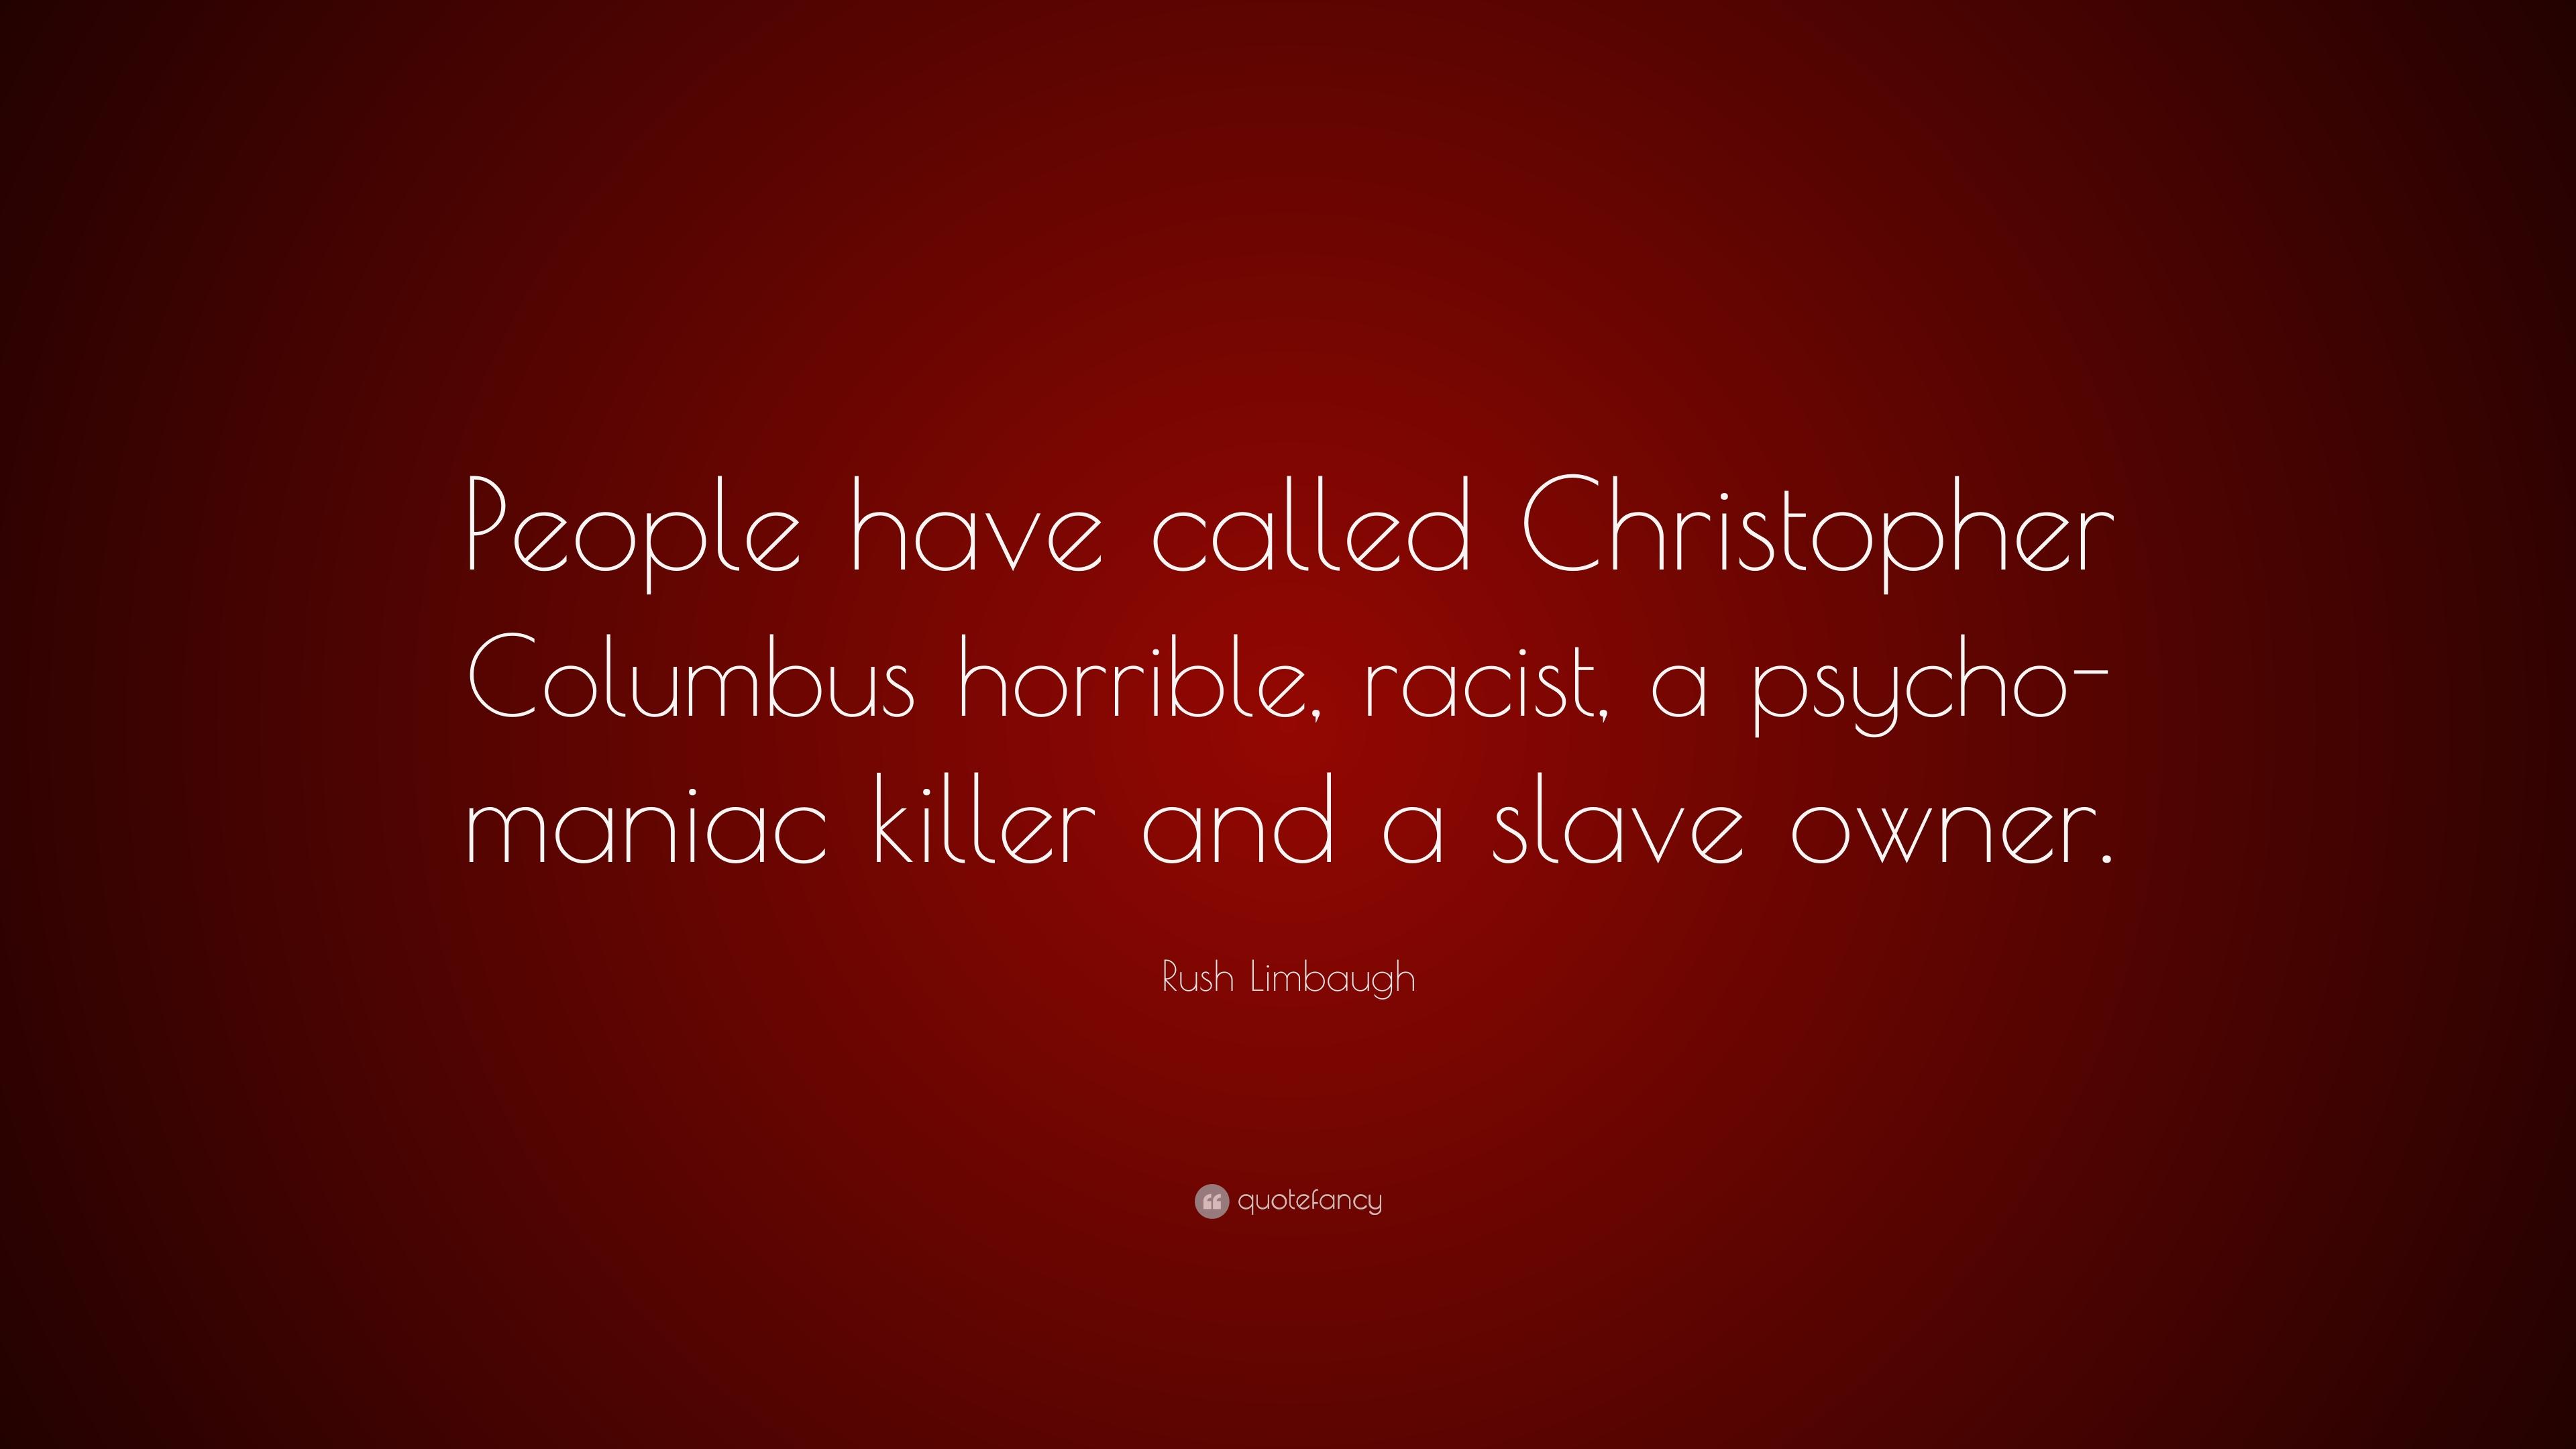 Rush Limbaugh Quote: “People have called Christopher Columbus